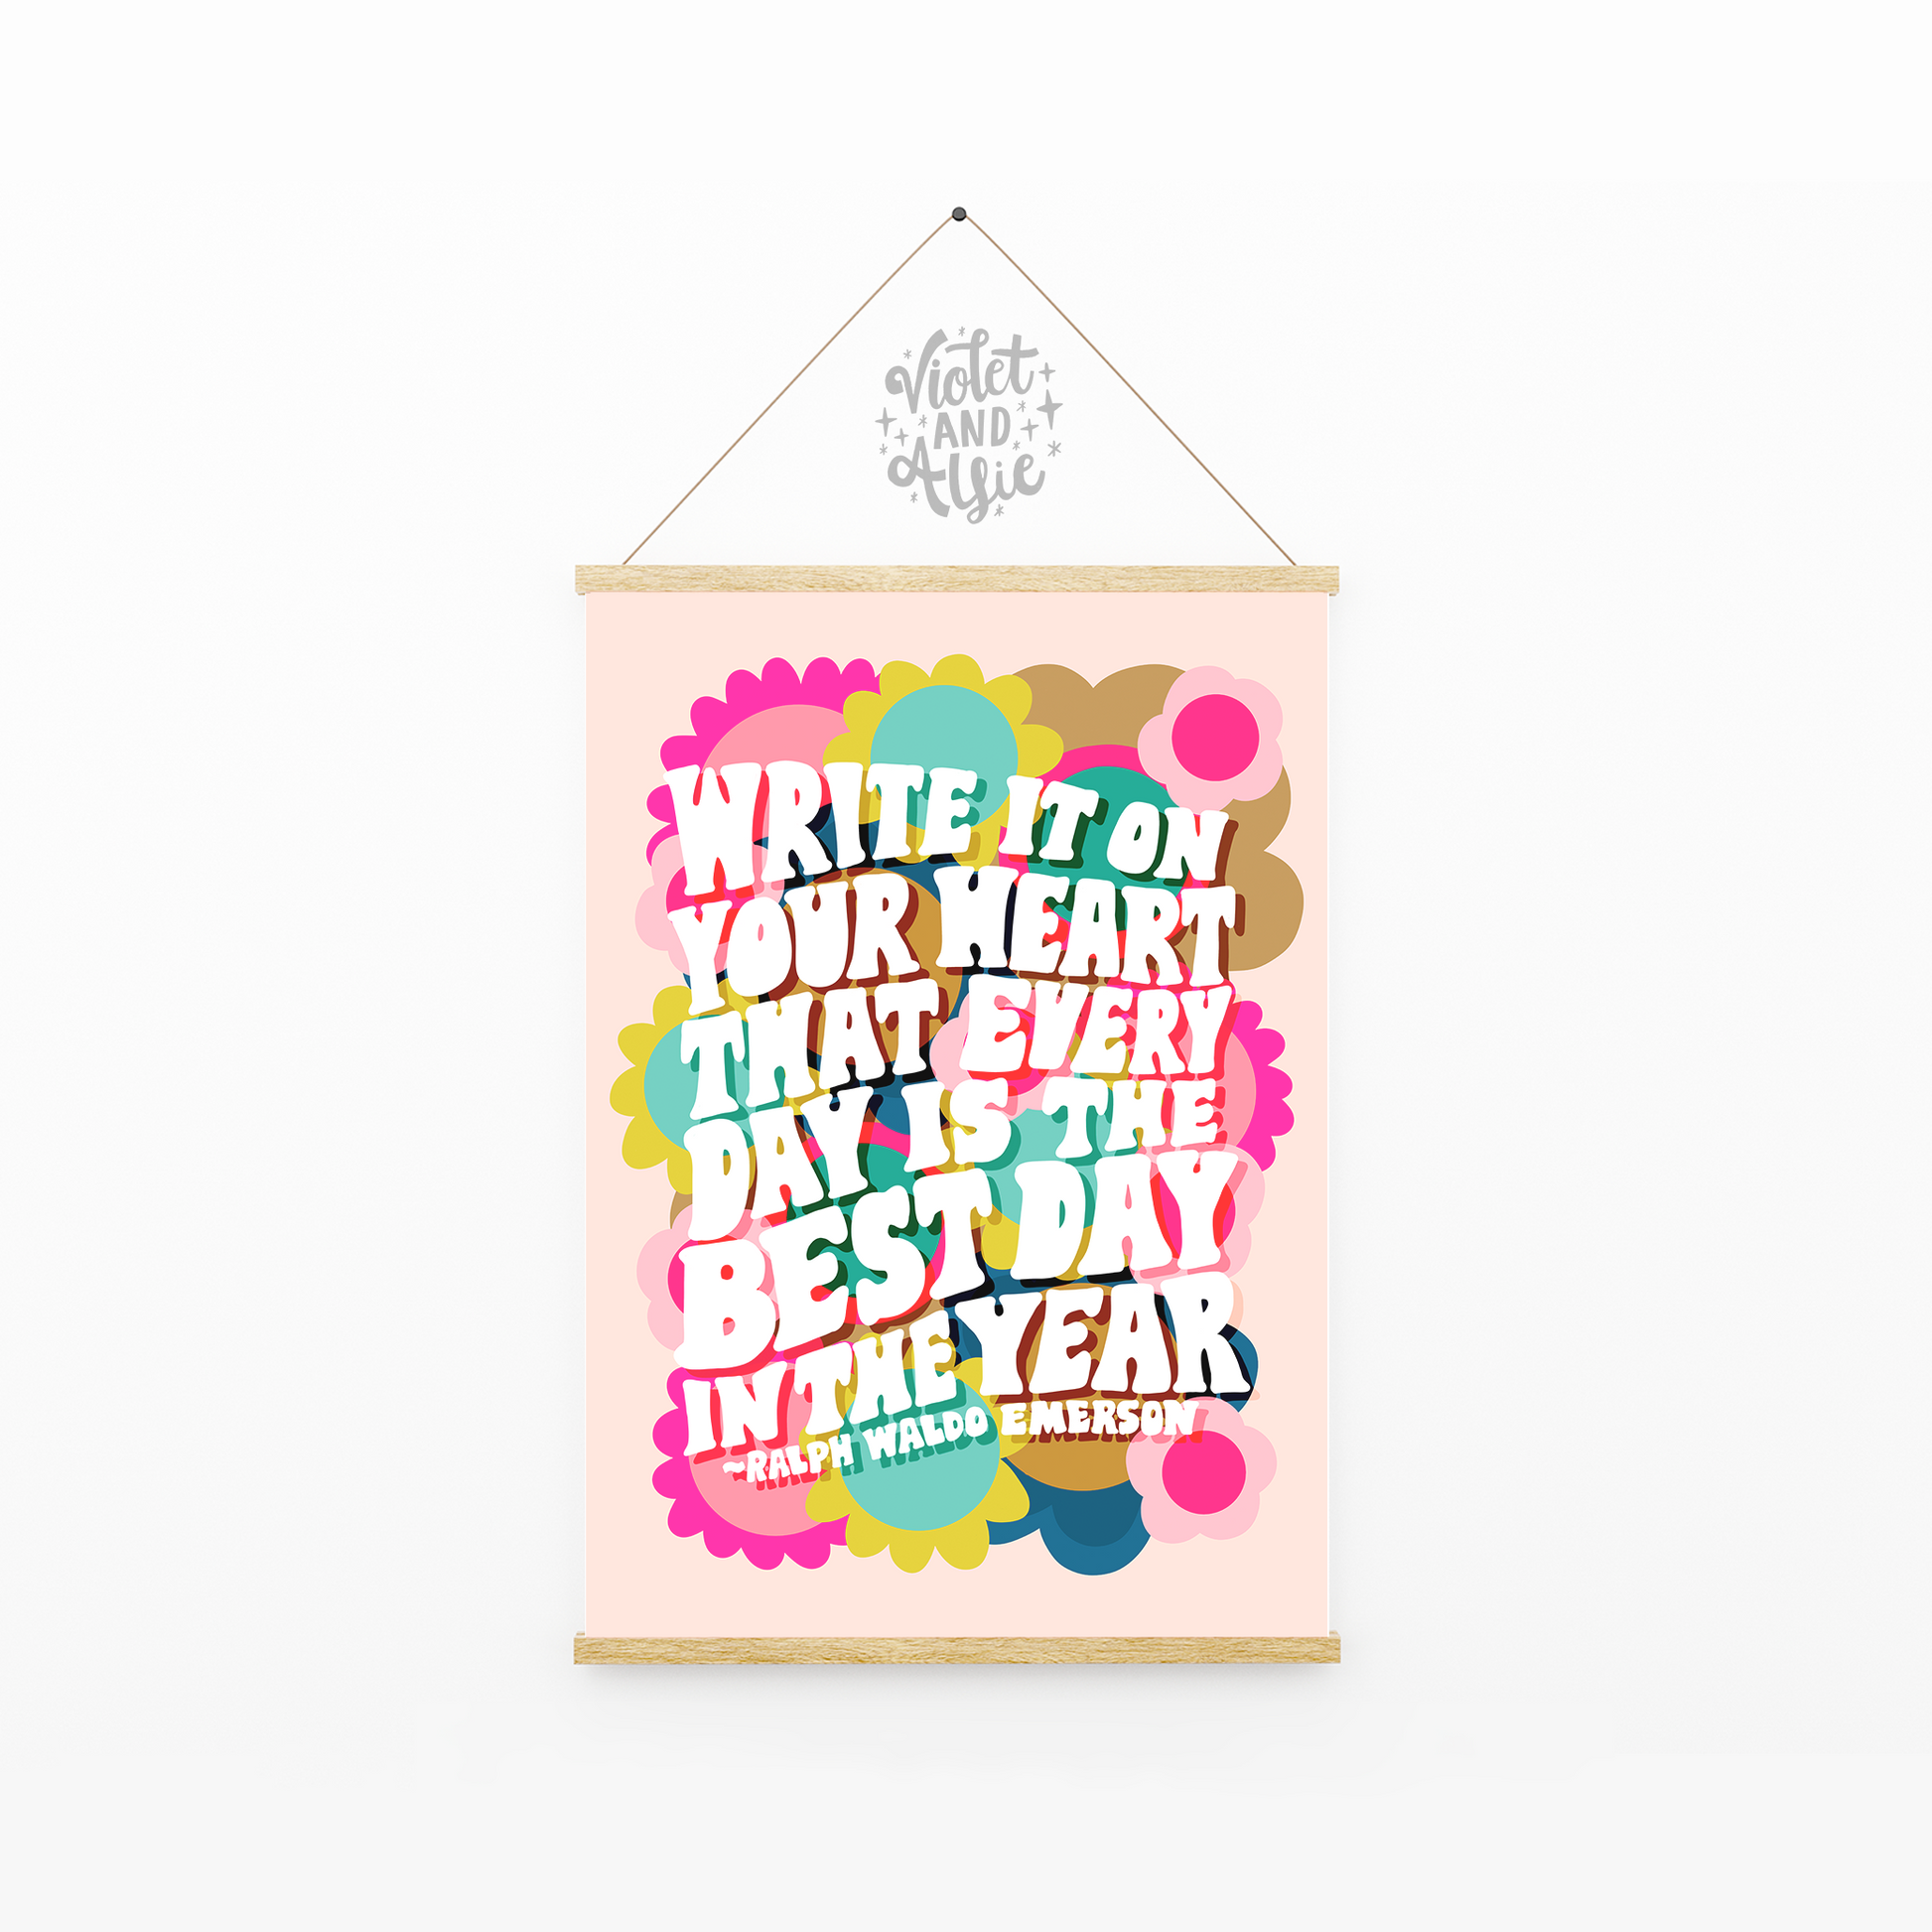 'Write it on your heart that every day is the best day in the year' Ralph Waldo Emerson. Inspirational Quote art, colourful floral botanical print, motivational wall art, retro home decor print, positivity art, flower illustration, seventies flower print, modern boho art, bold colourful decor, hippy print